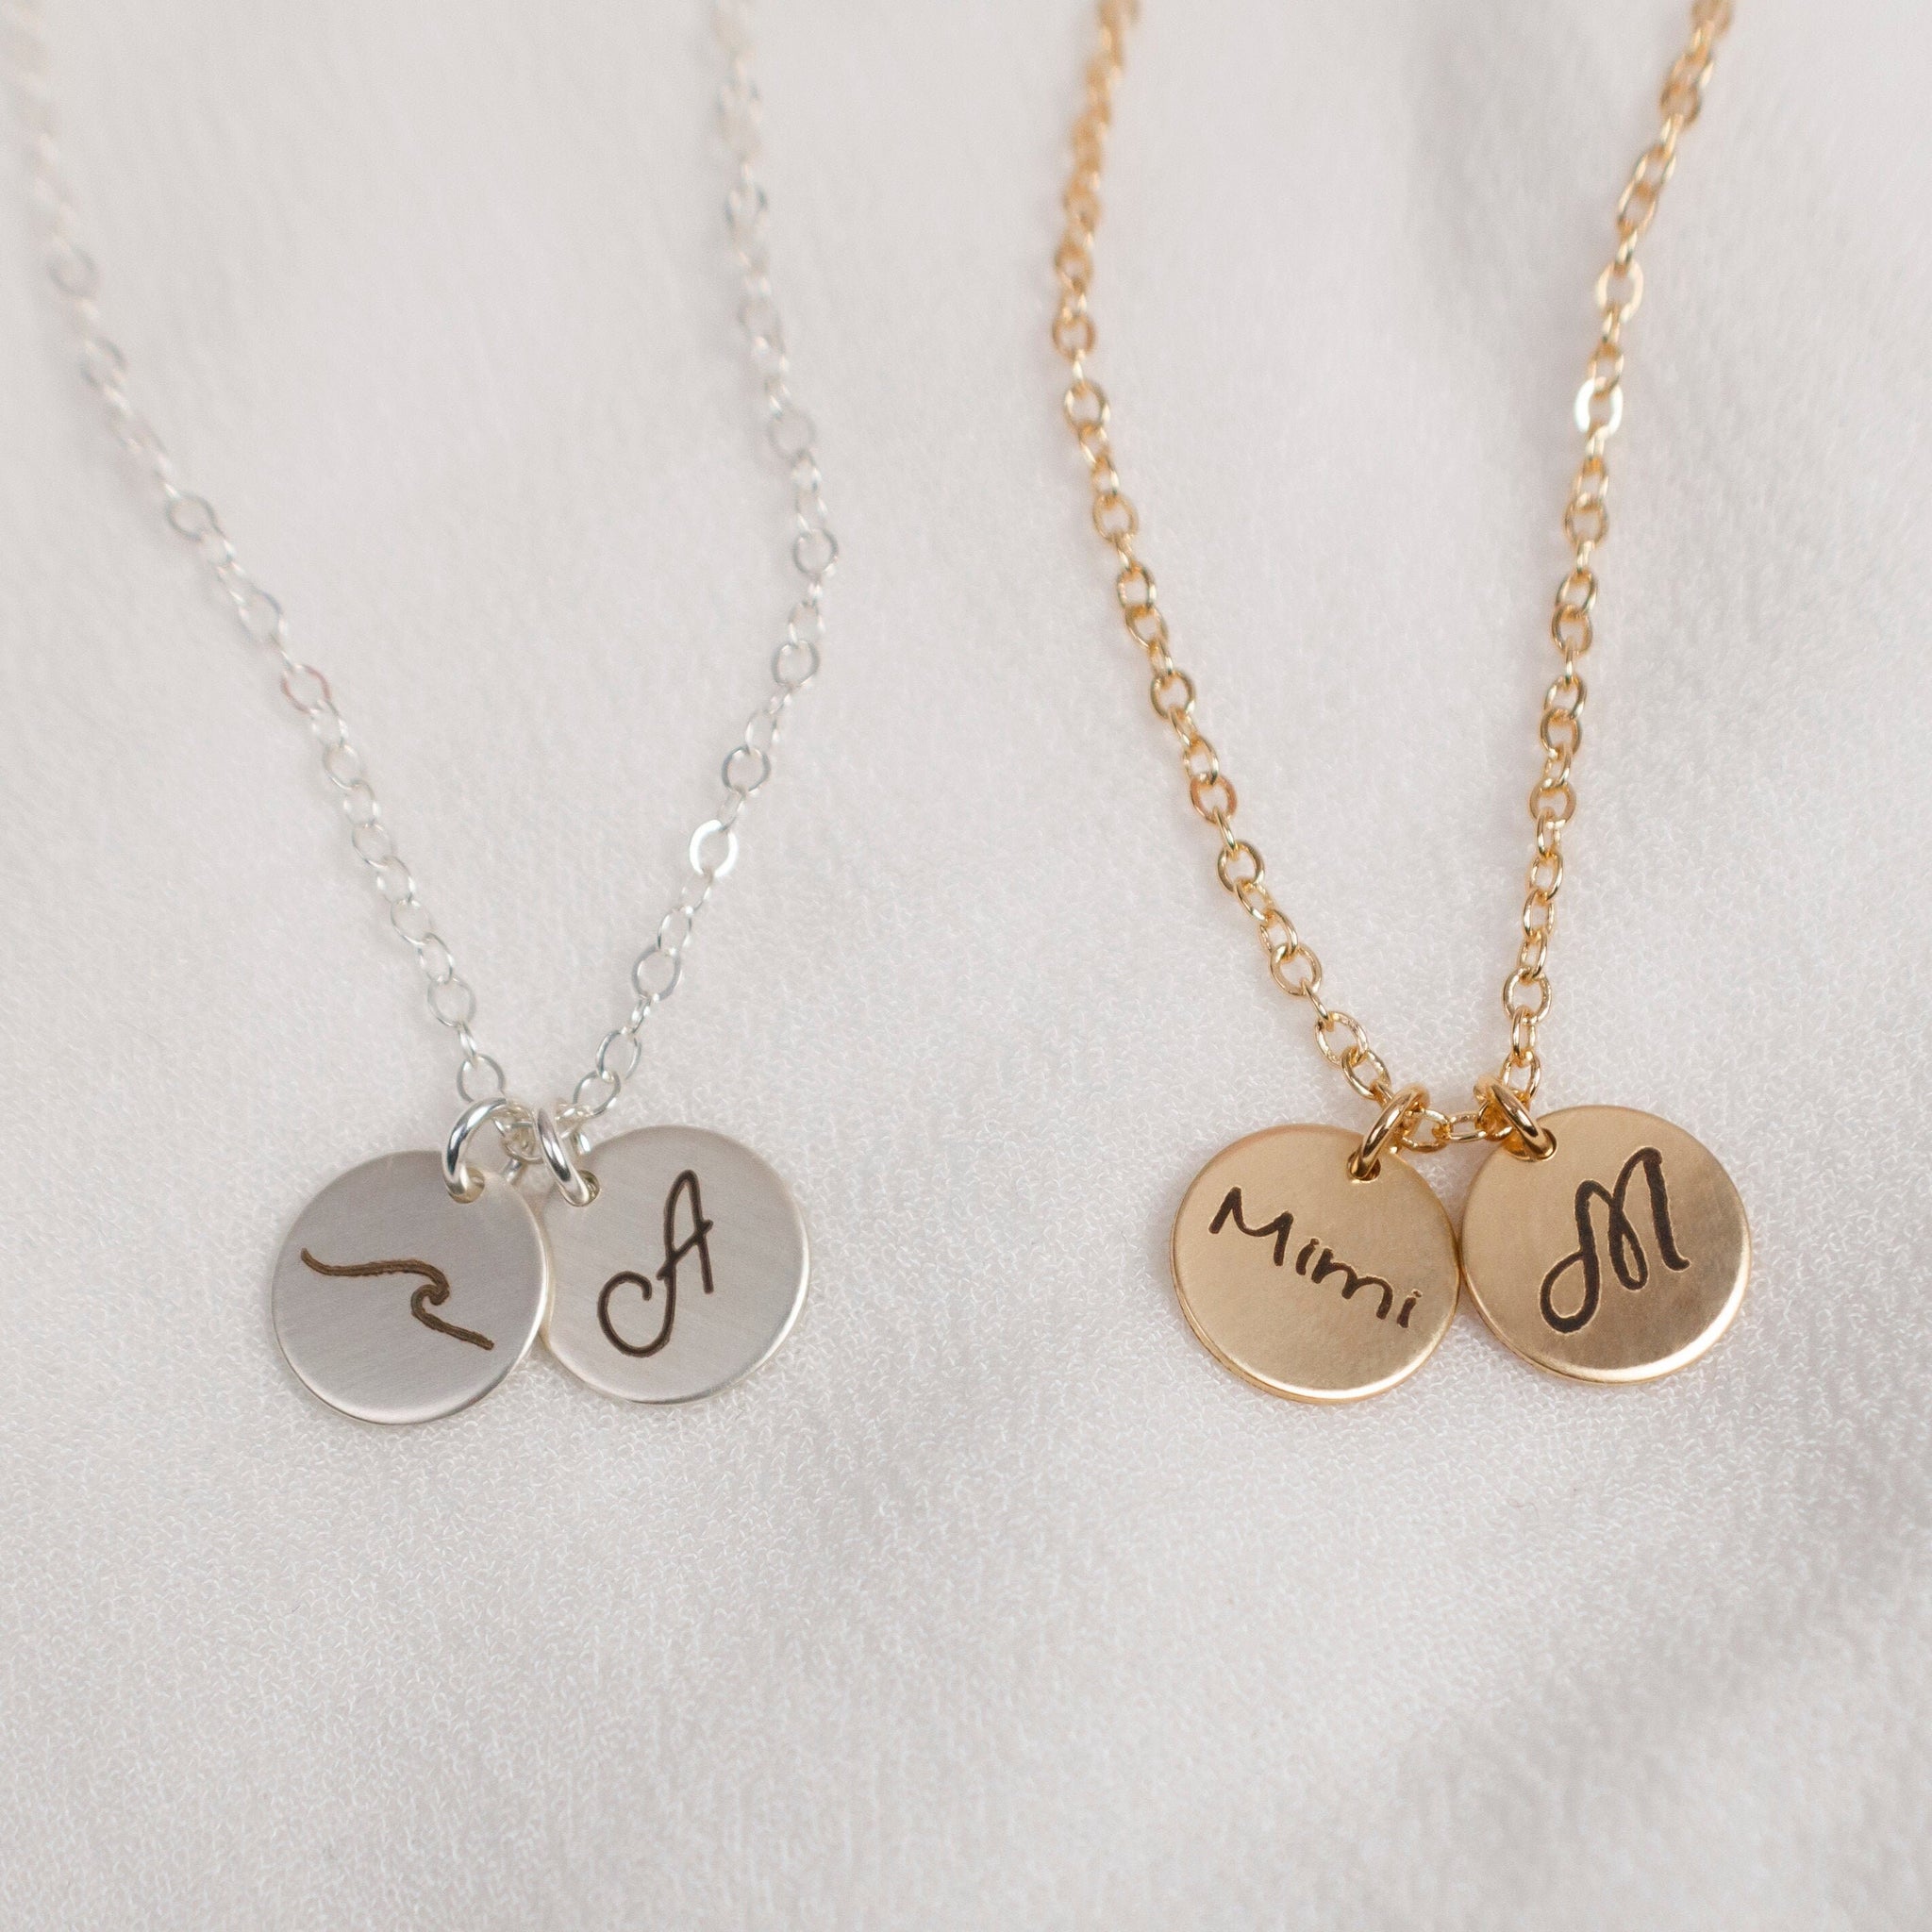 Custom Initial Necklace, Dainty Disc Necklace, Small Letter Necklace, Bridesmaid Gift, Sterling Silver, Gold Filled